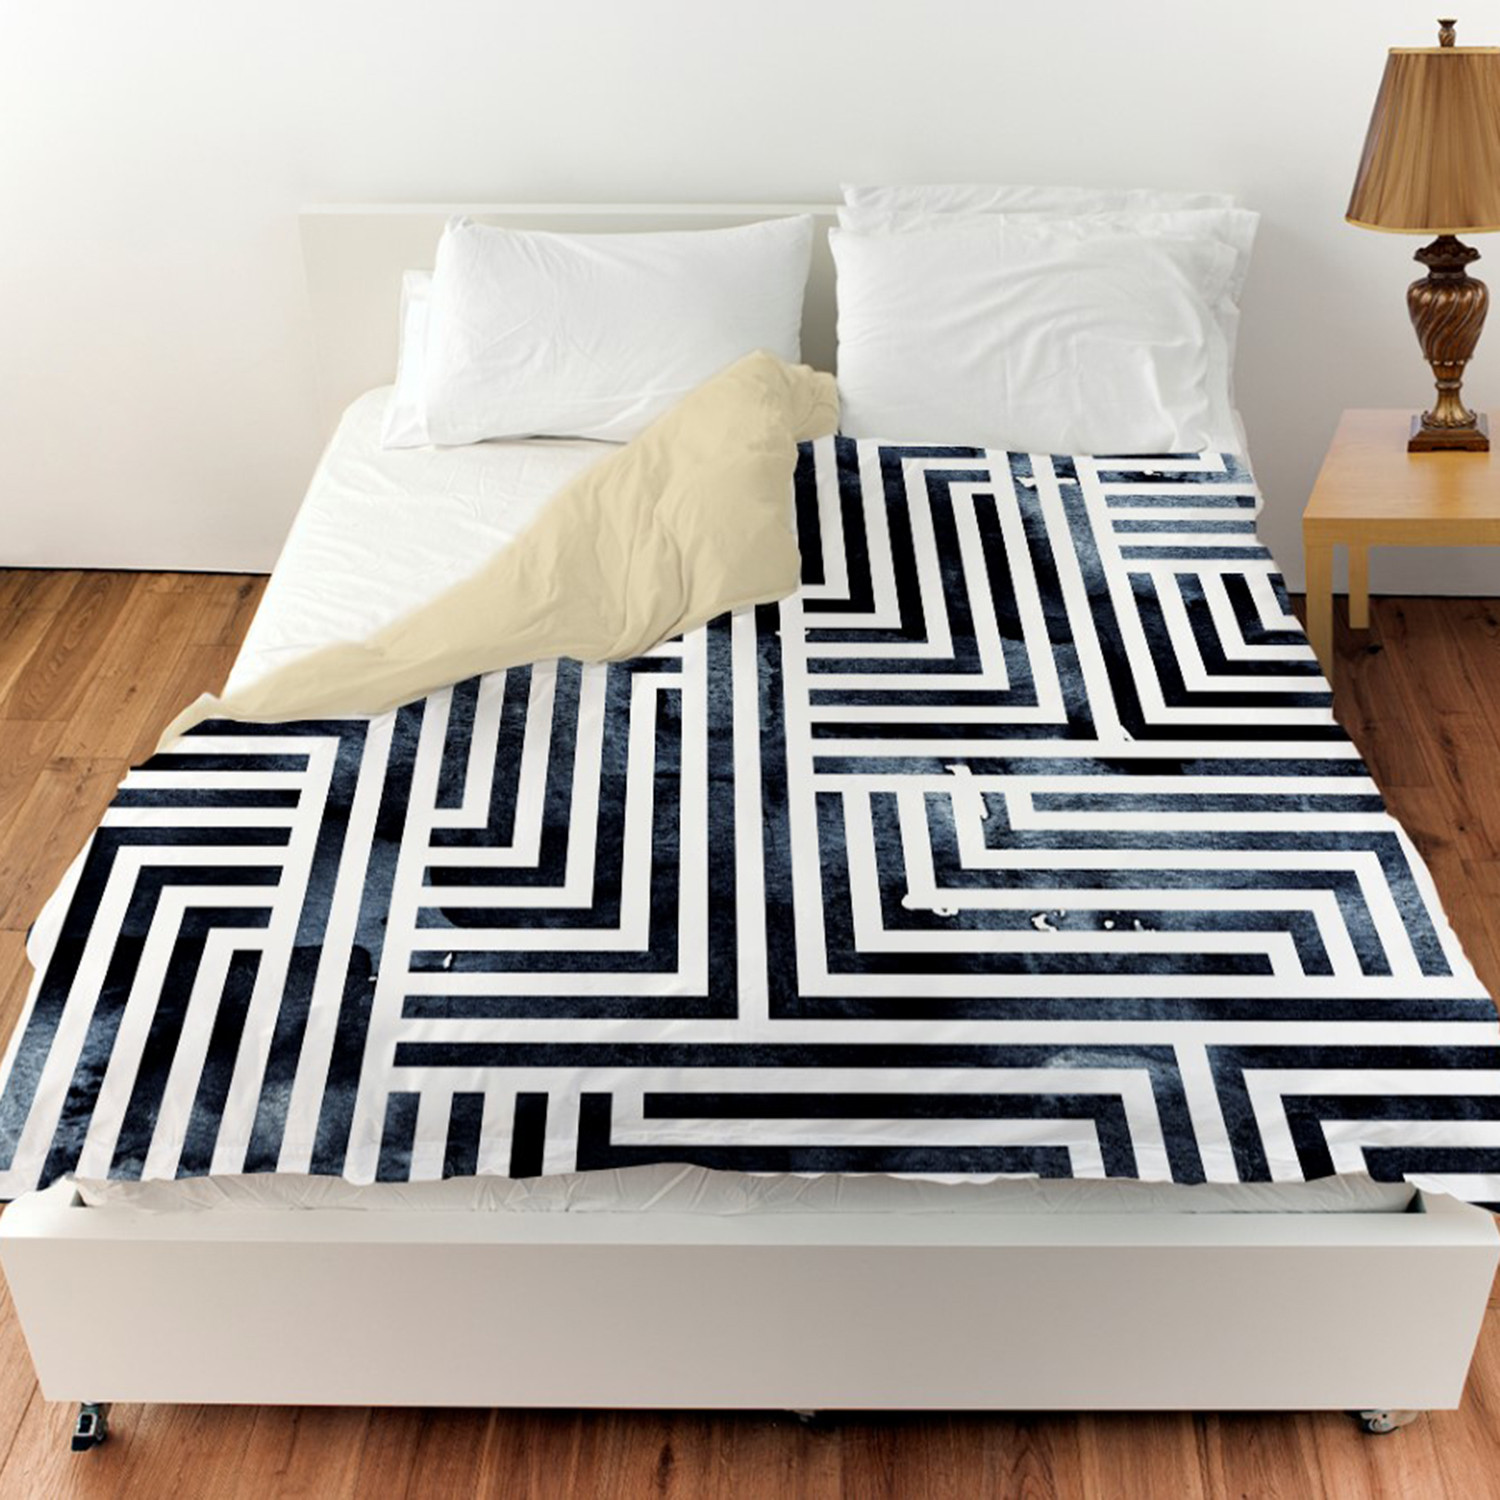 Mod Pattern 2 Duvet Cover Queen Oliver Gal Touch Of Modern